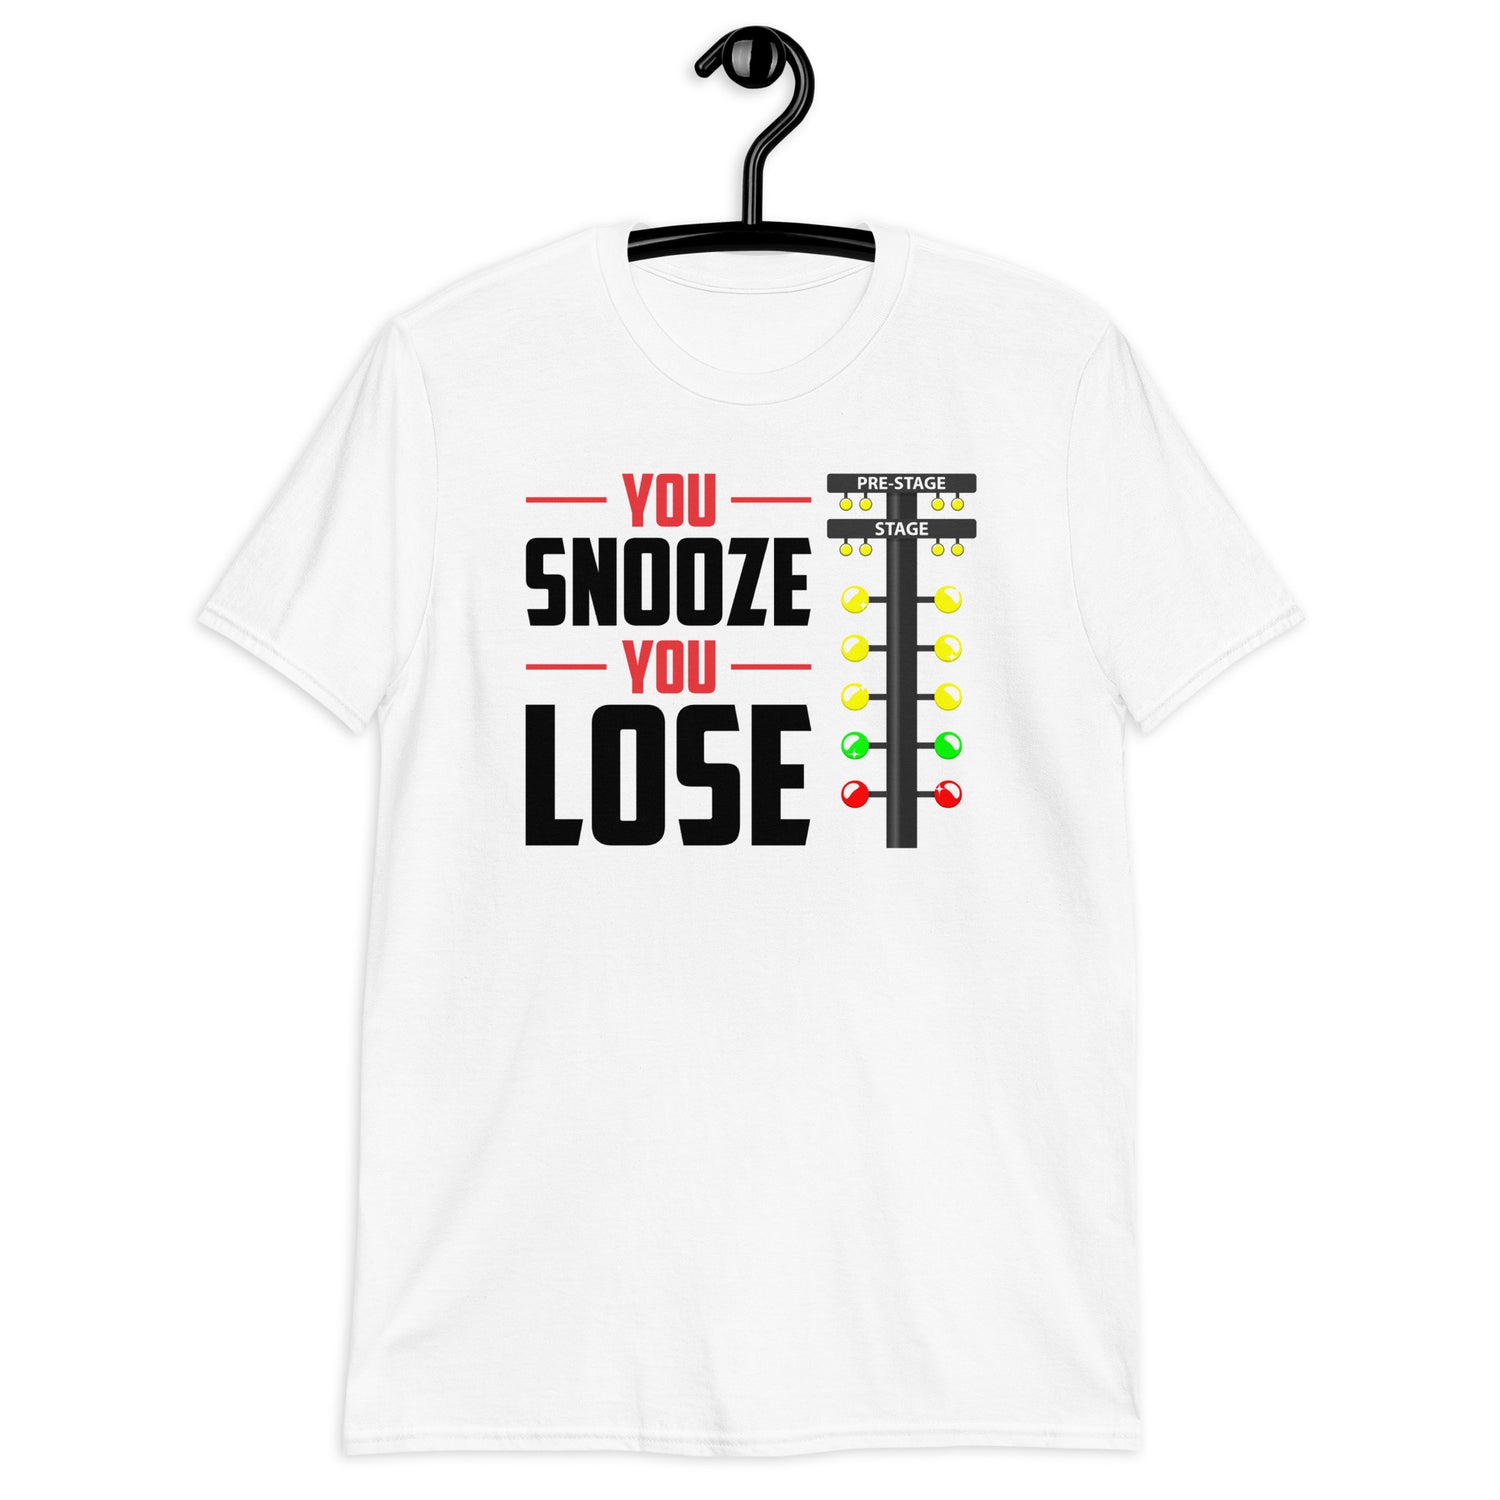 you snooze you lose T-Shirt